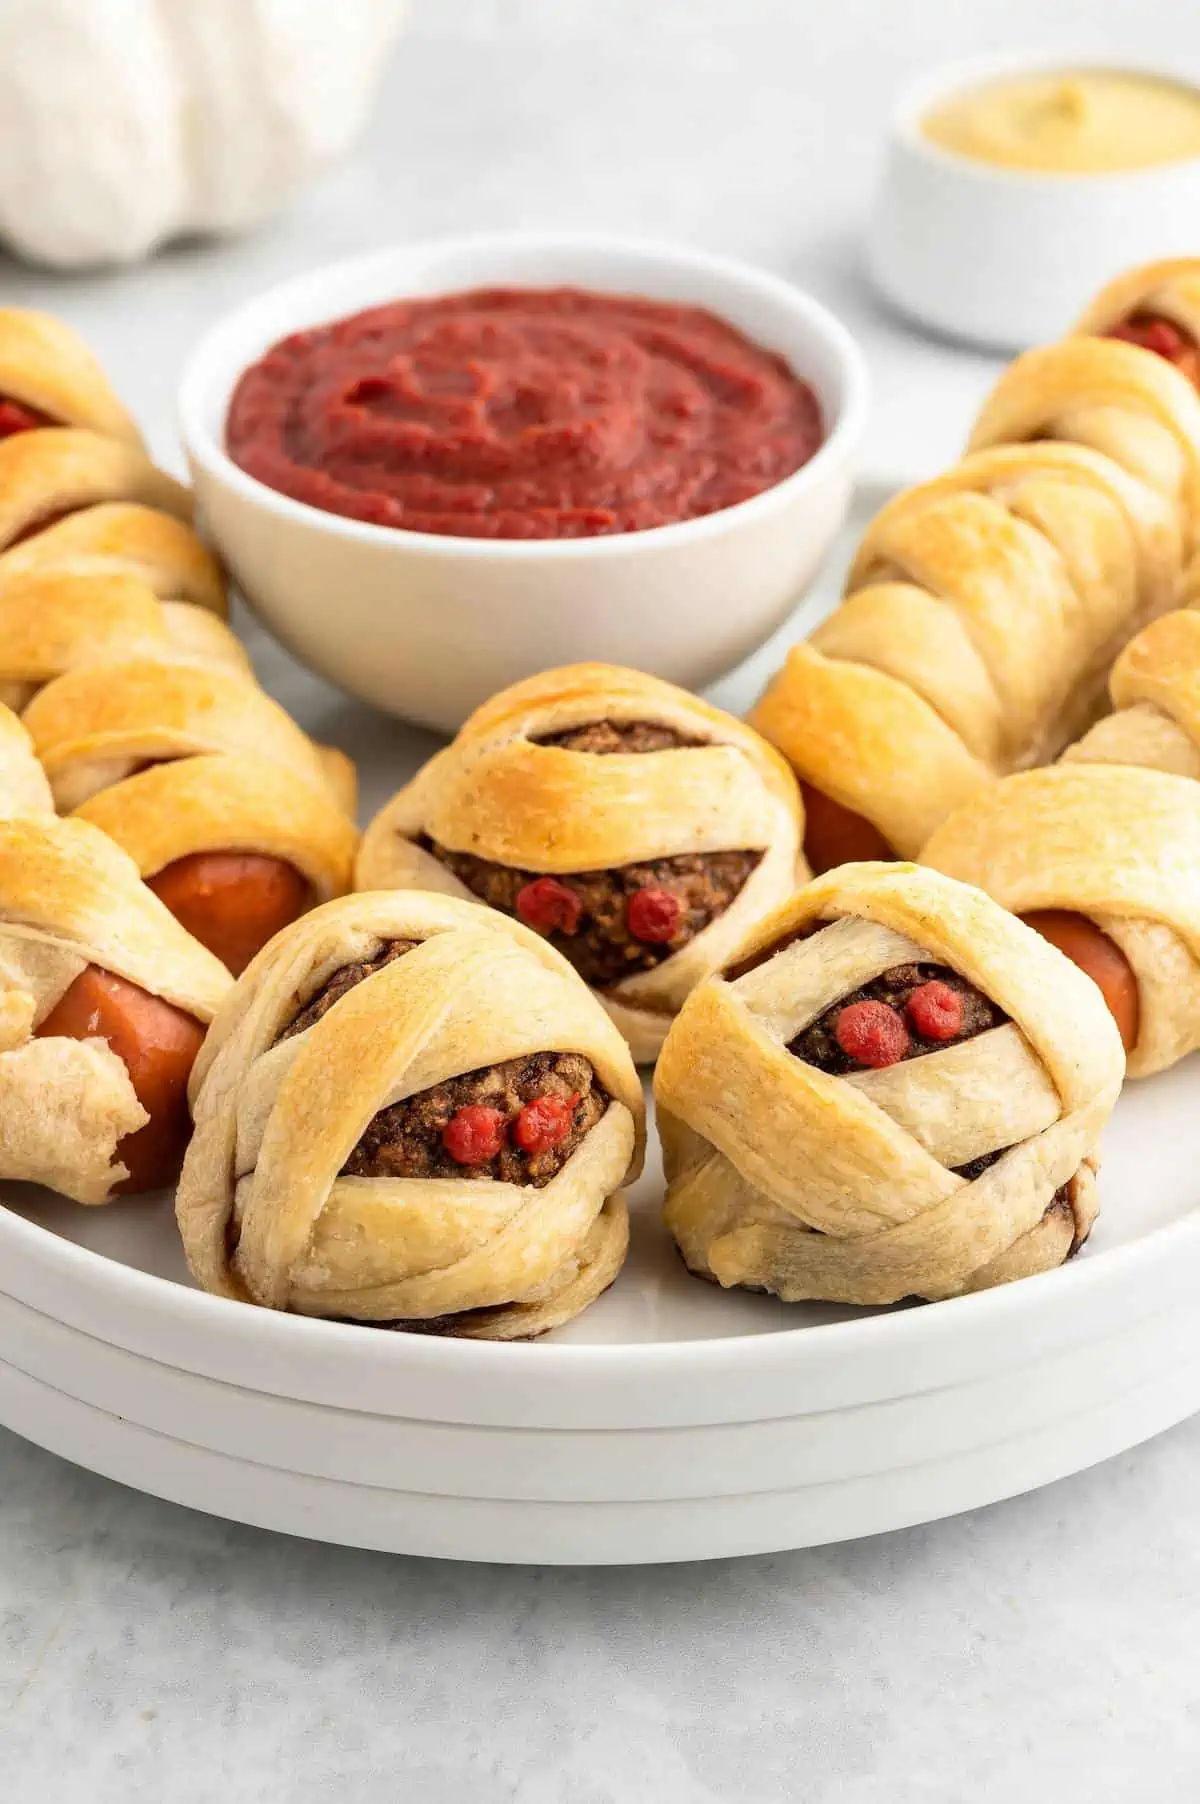 Mummy balls and mummy dogs on a plate serve with a bowl of ketchup.